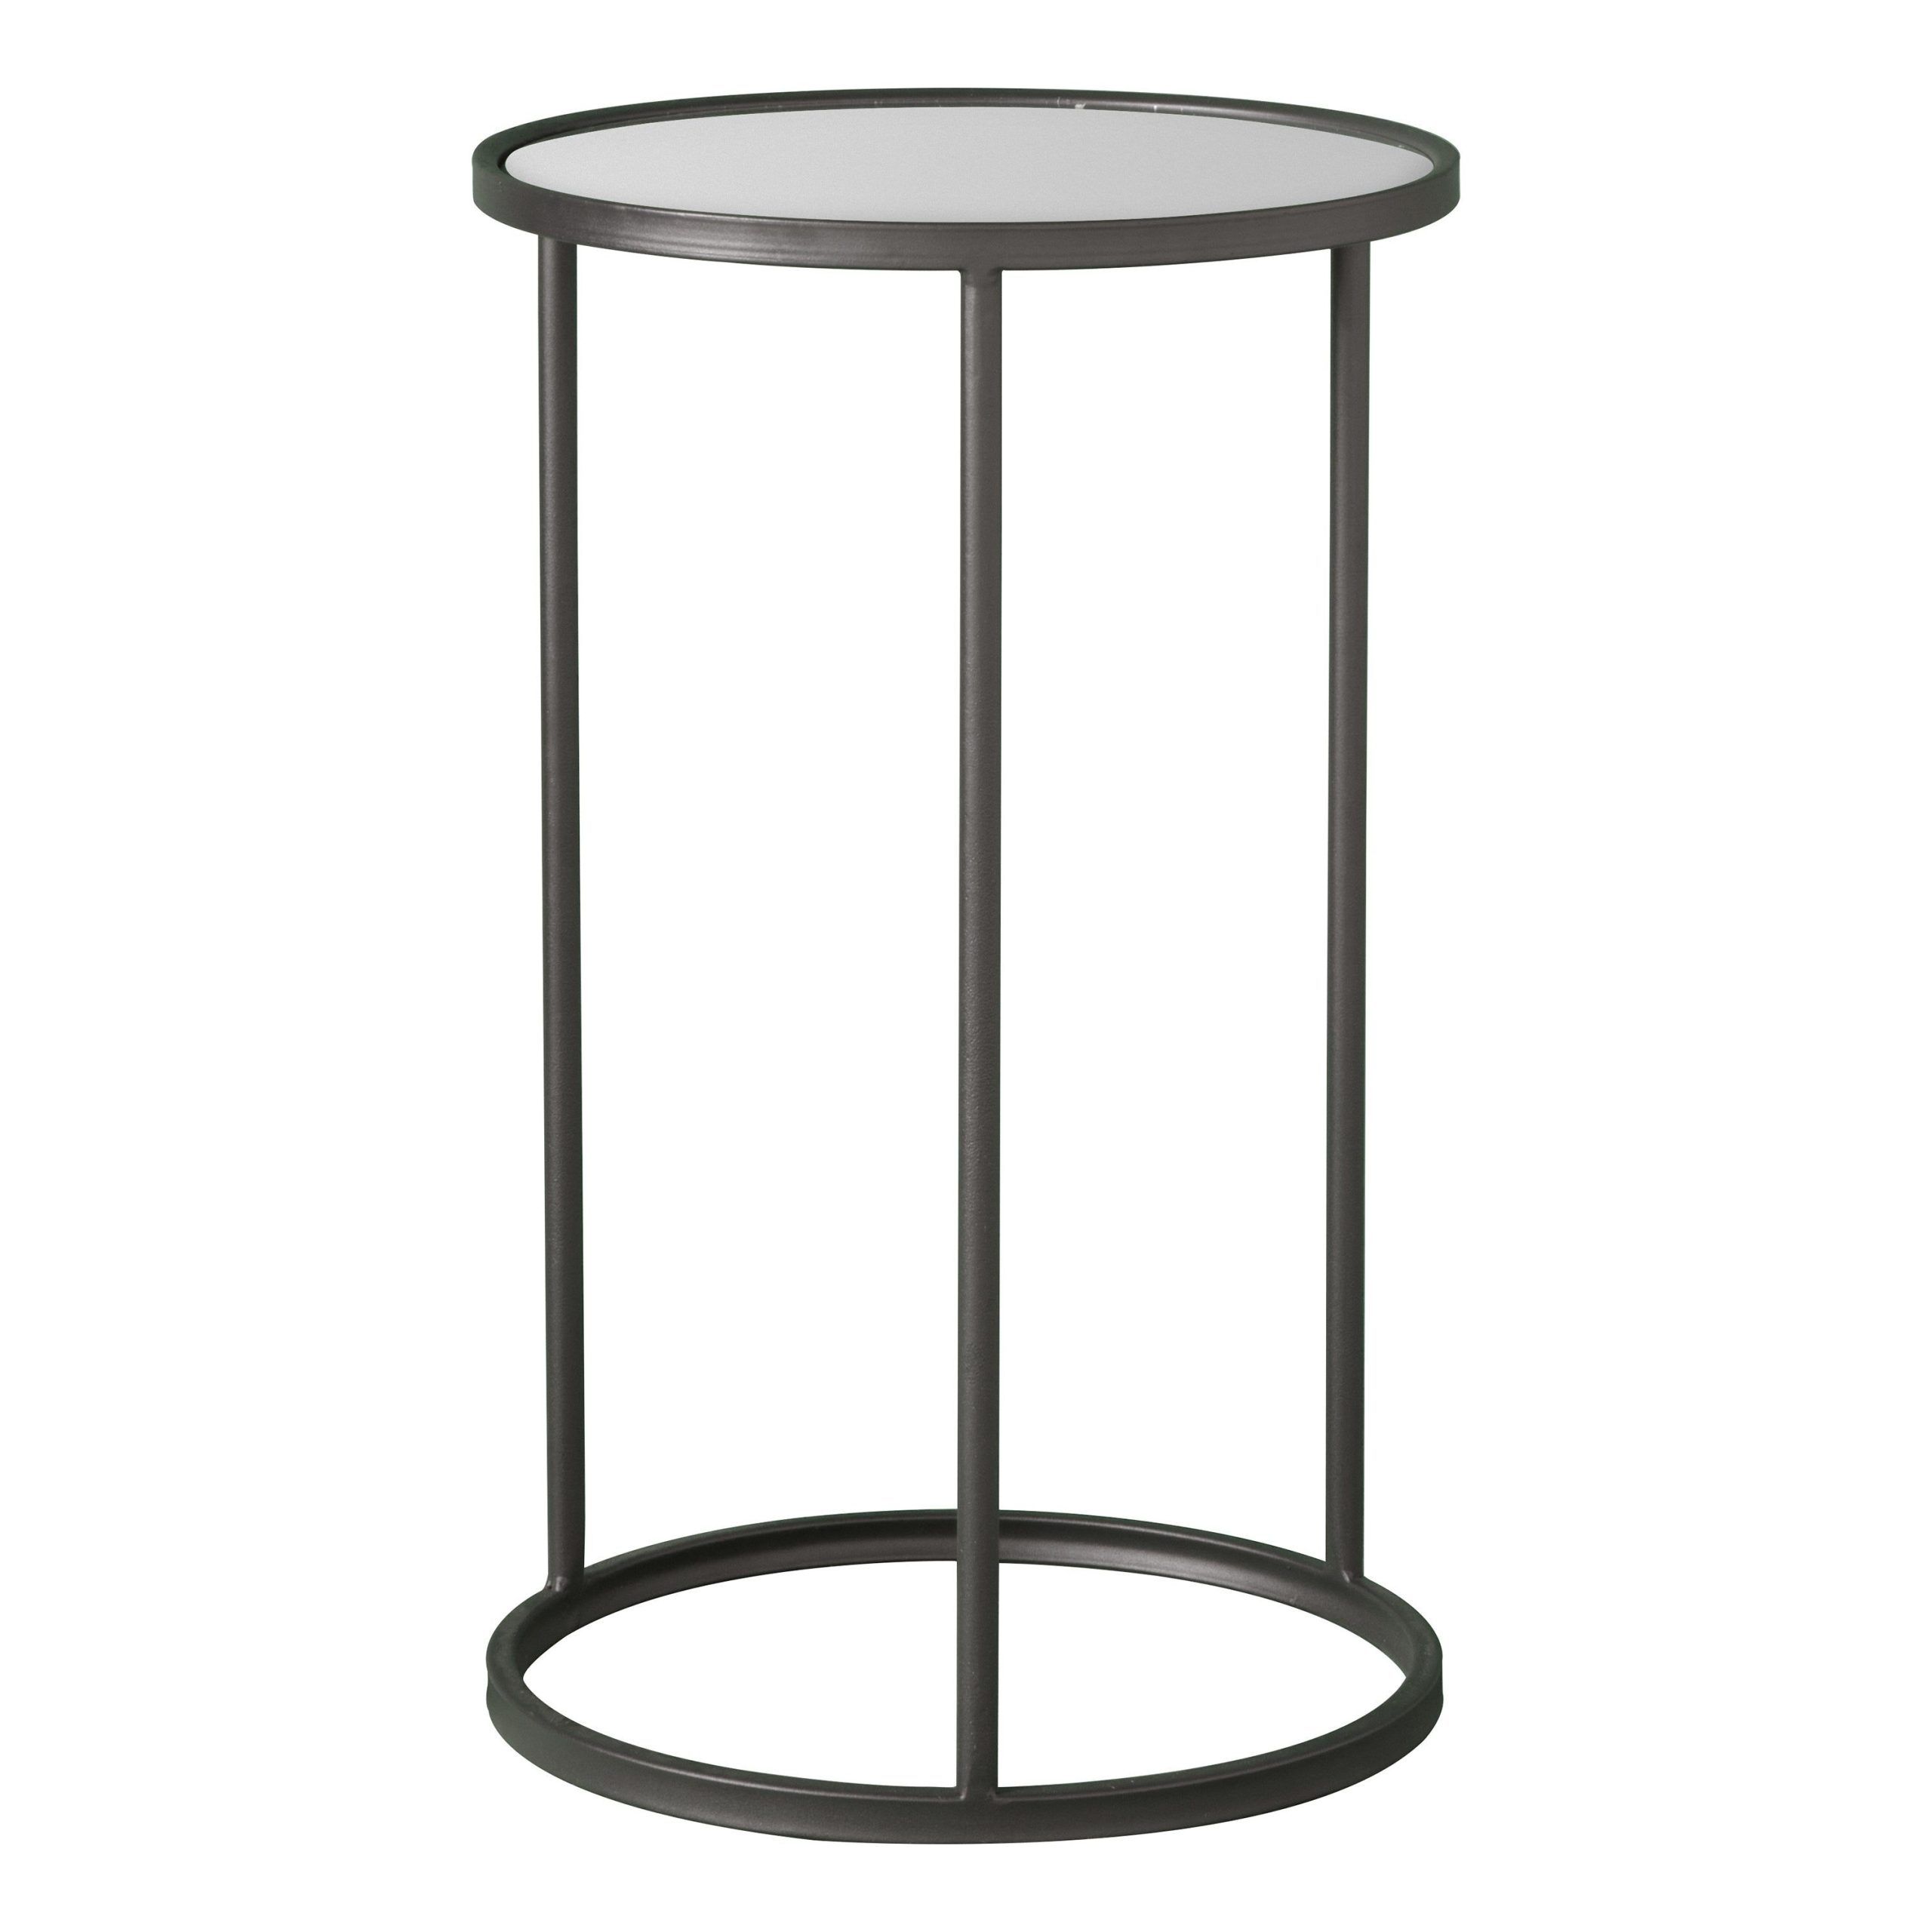 Huttone Side Table | Metal Side Table, Side Table, Mirror Side Table Intended For Metal Side Tables For Living Spaces (Gallery 8 of 20)